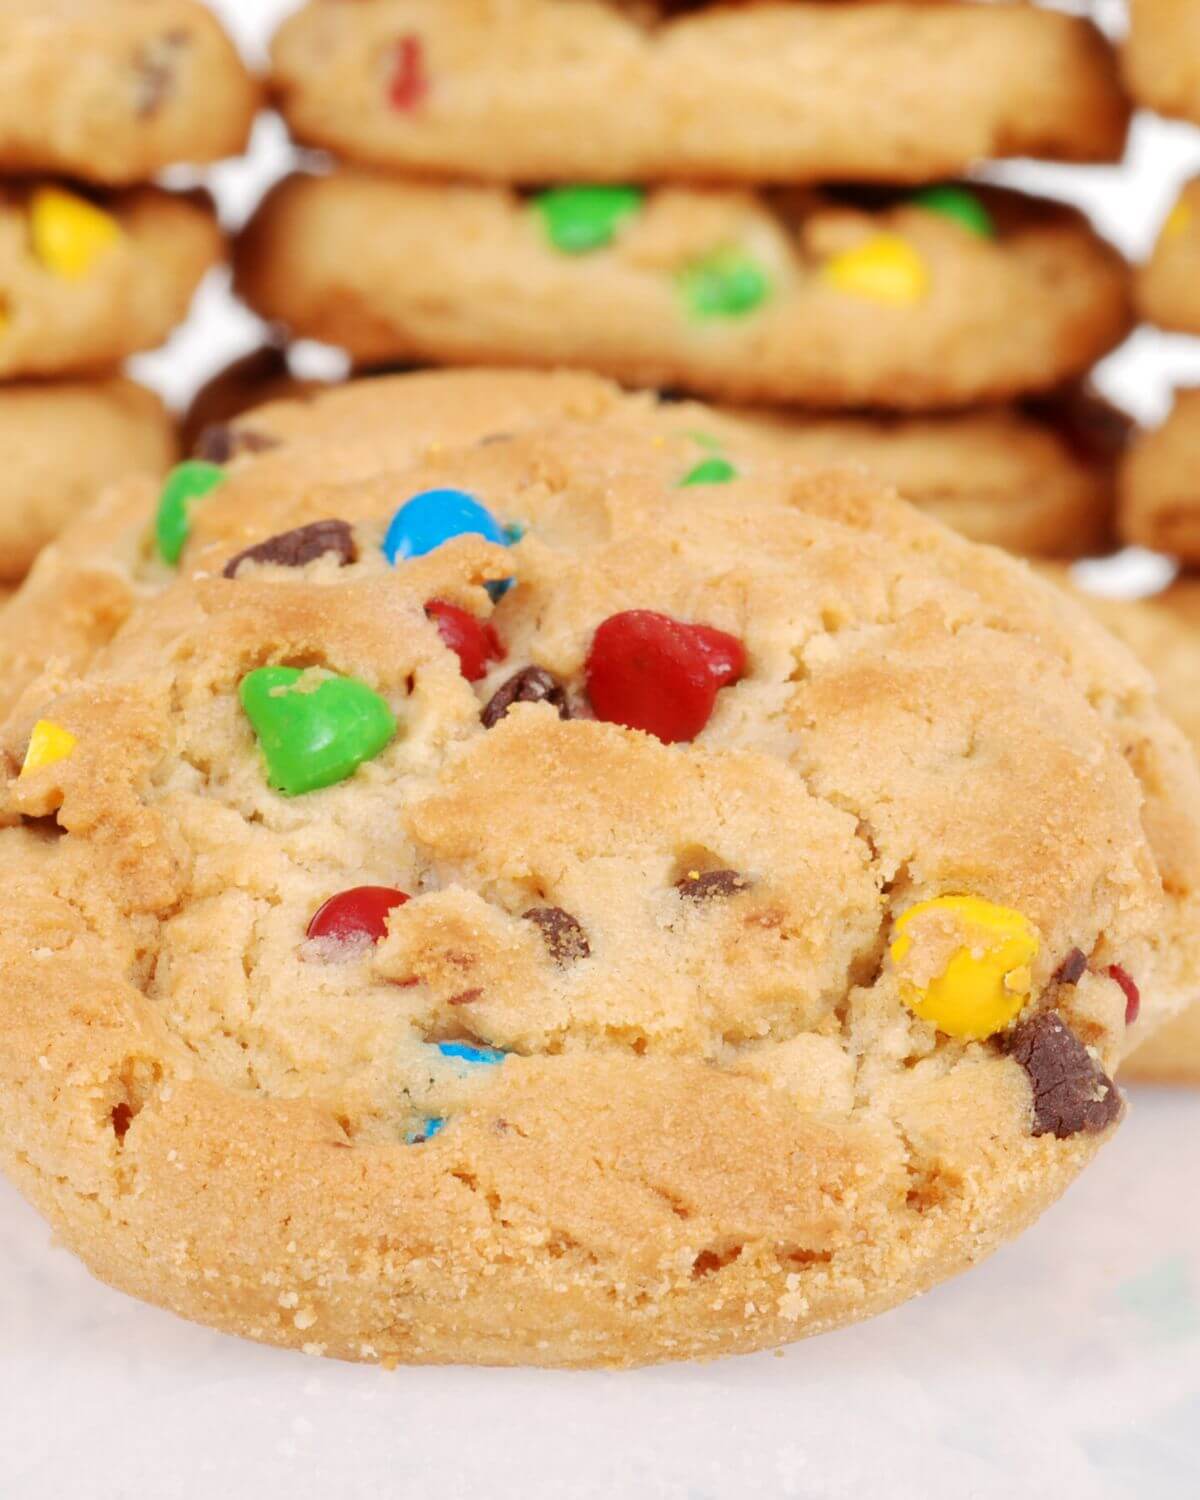 A close up on the cookie with the candies in it.